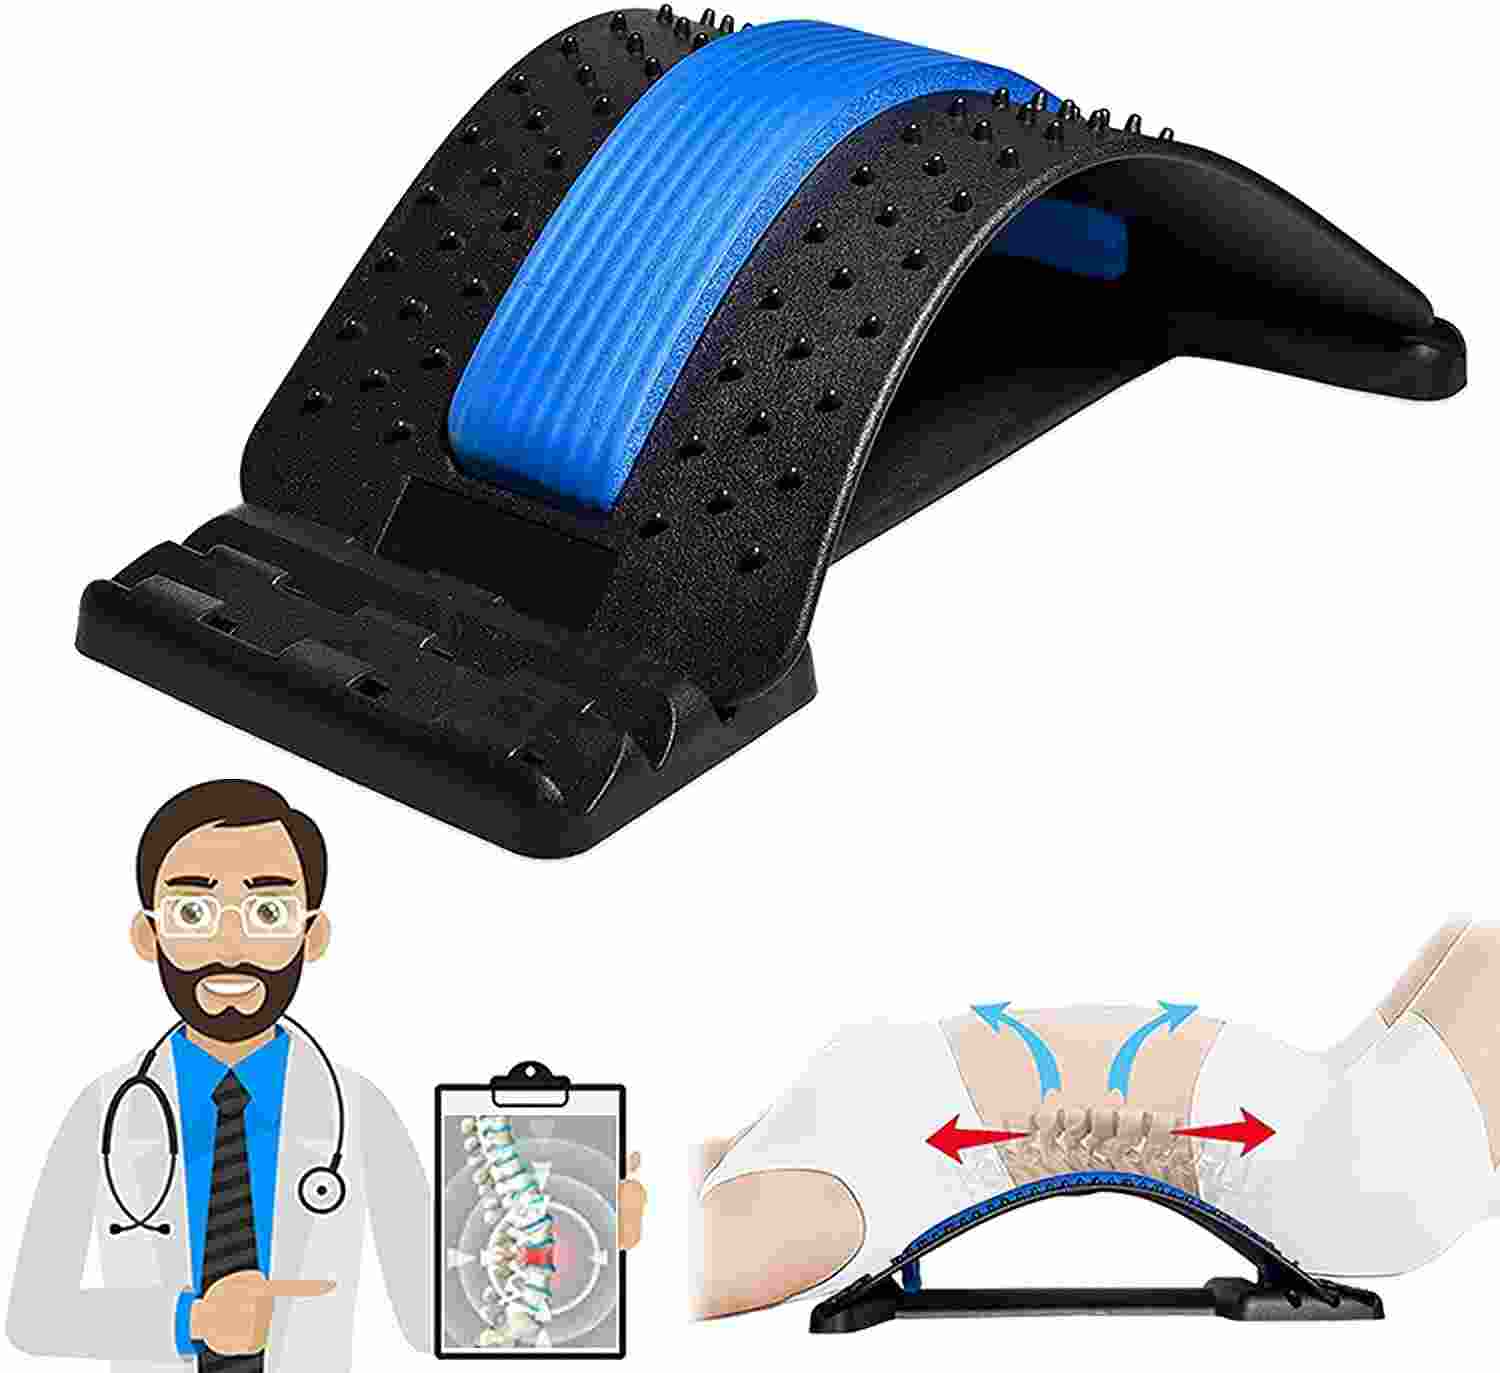 Back stretcher for lower back pain